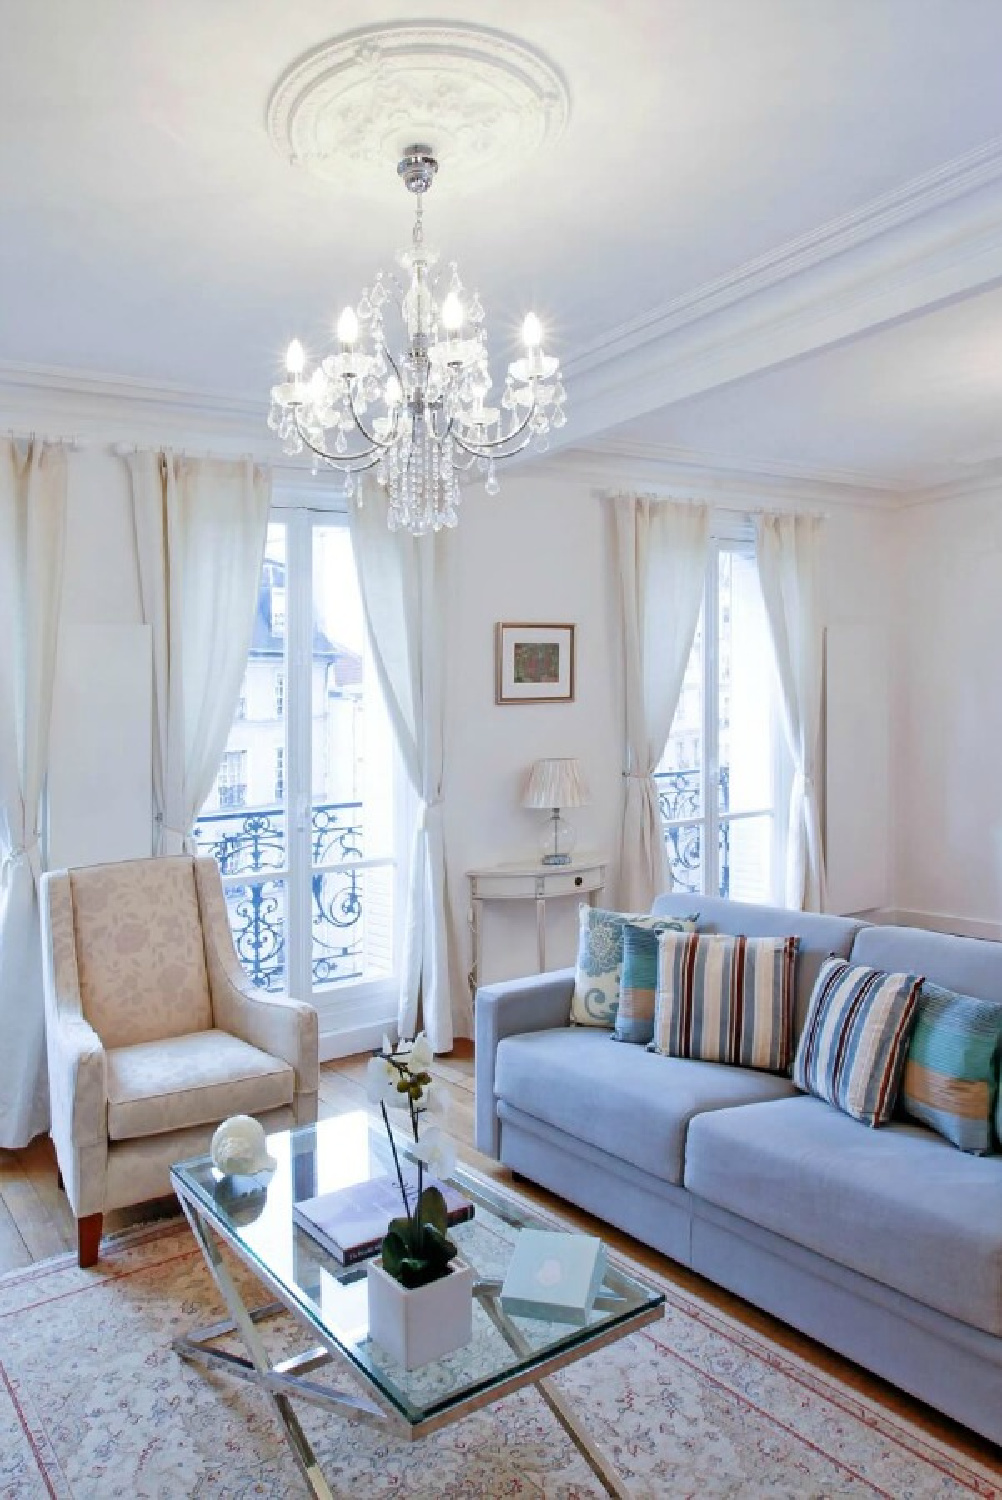 Paris apartment living room with white trim, crystal chandelier, and French doors to balcony - Hello Lovely Studio.